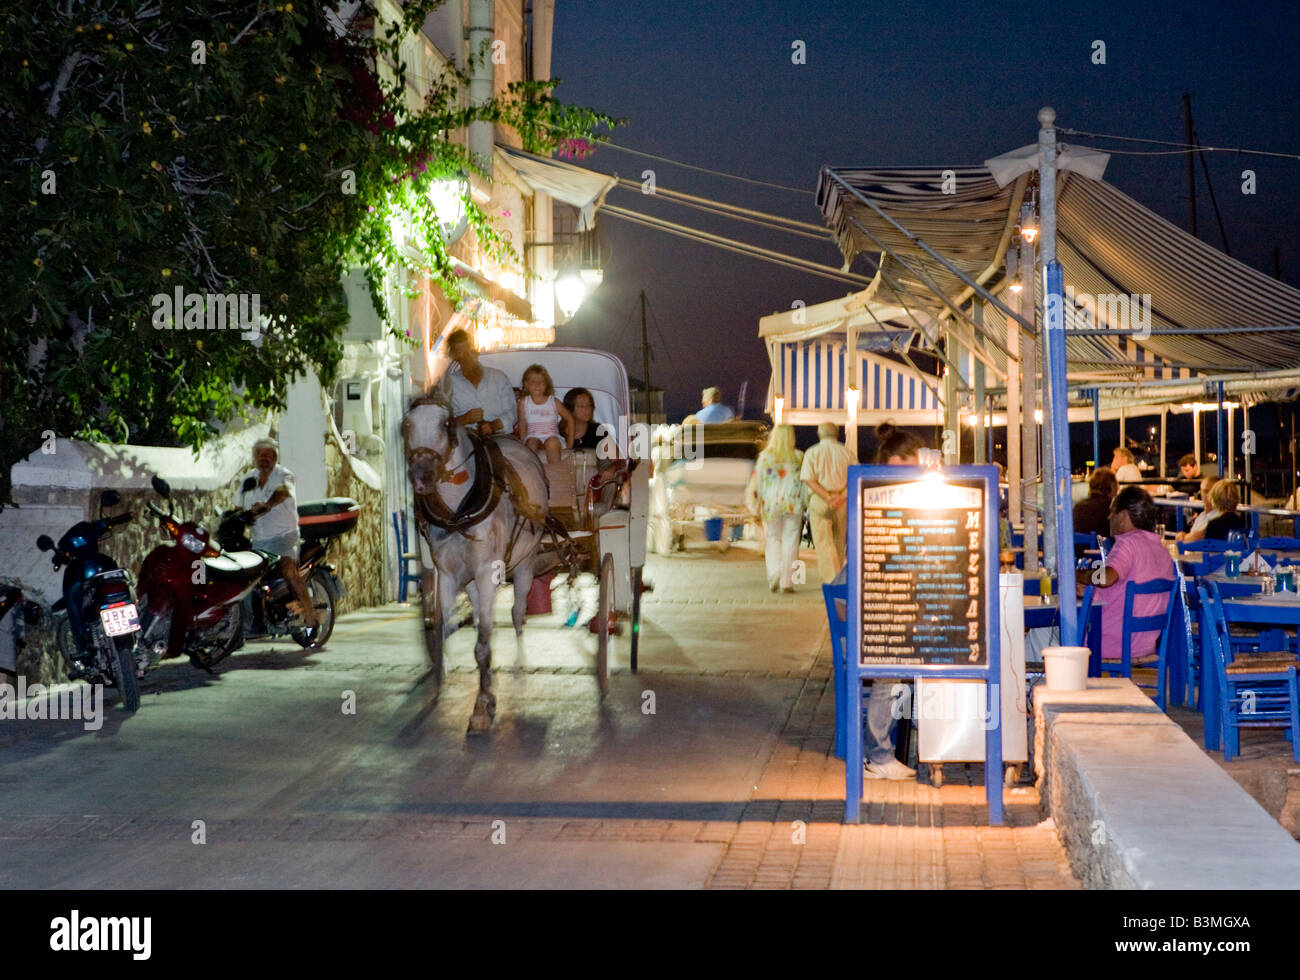 Horse And Carriage Nightime Old Harbour, Spetses, Greece Hellas Stock Photo